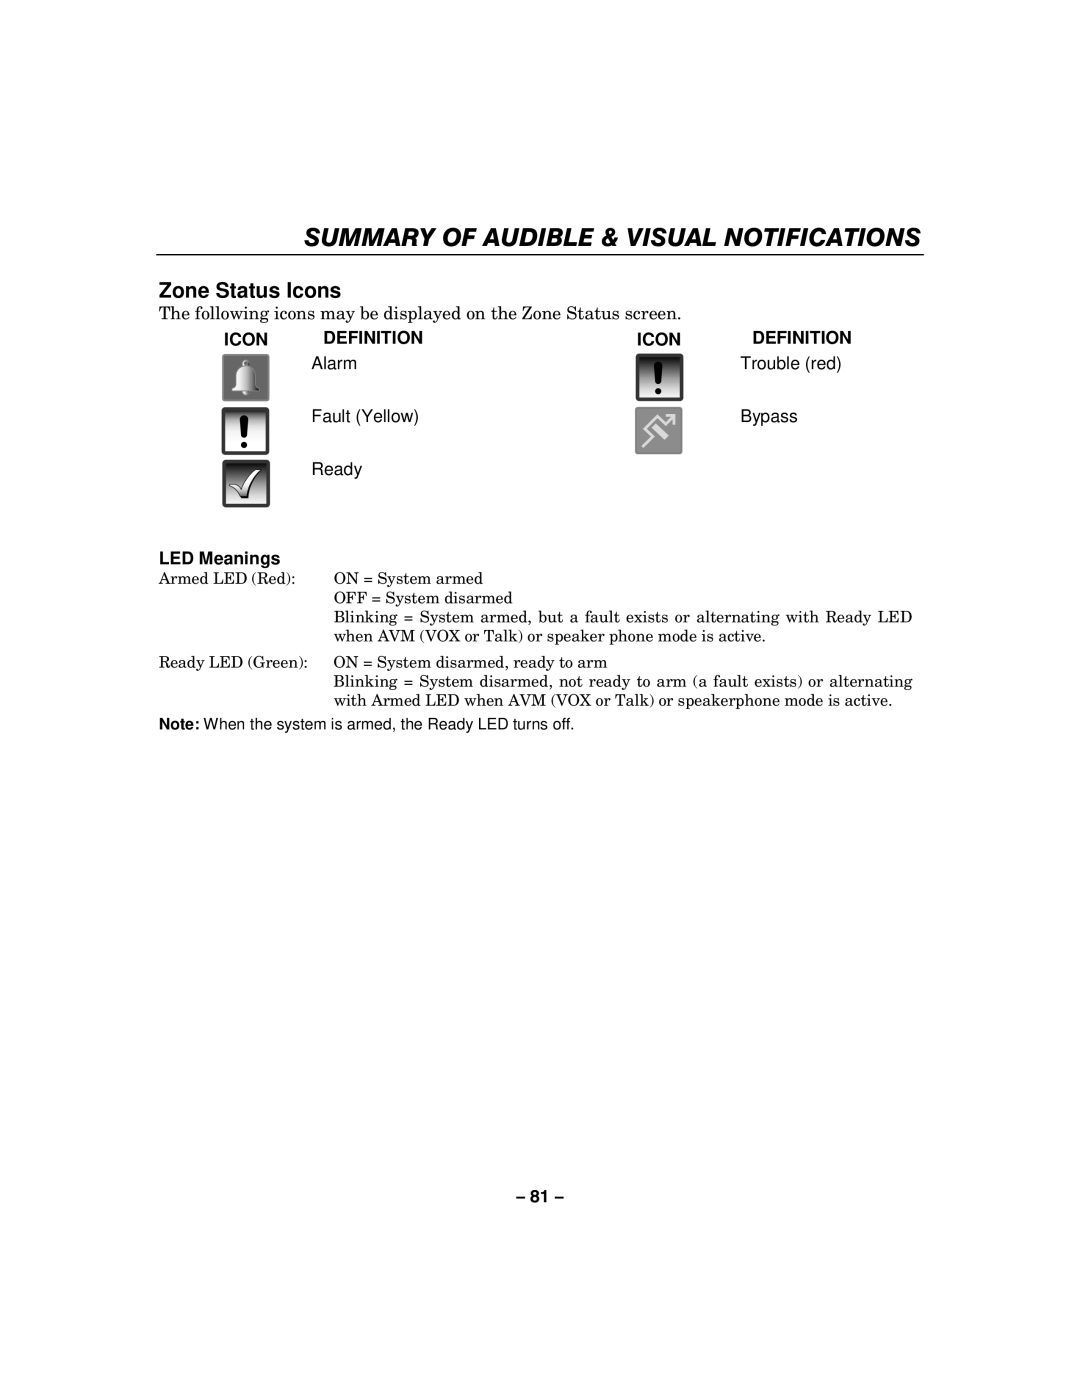 Honeywell L5100 manual Zone Status Icons, ICON LED Meanings, Summary Of Audible & Visual Notifications, Definition 